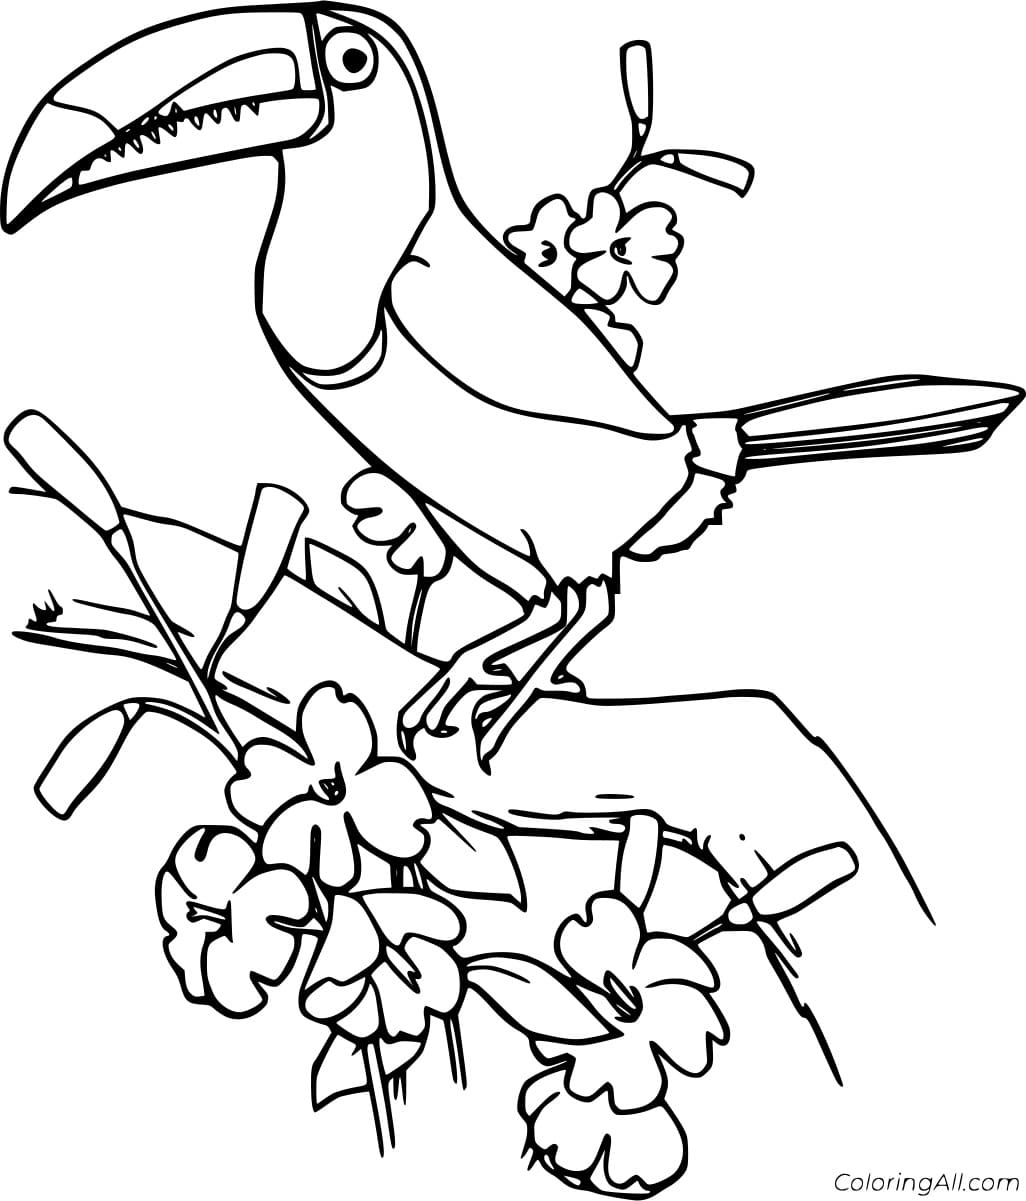 Chestnut Eared Aracari and Flowers To Print Coloring Page